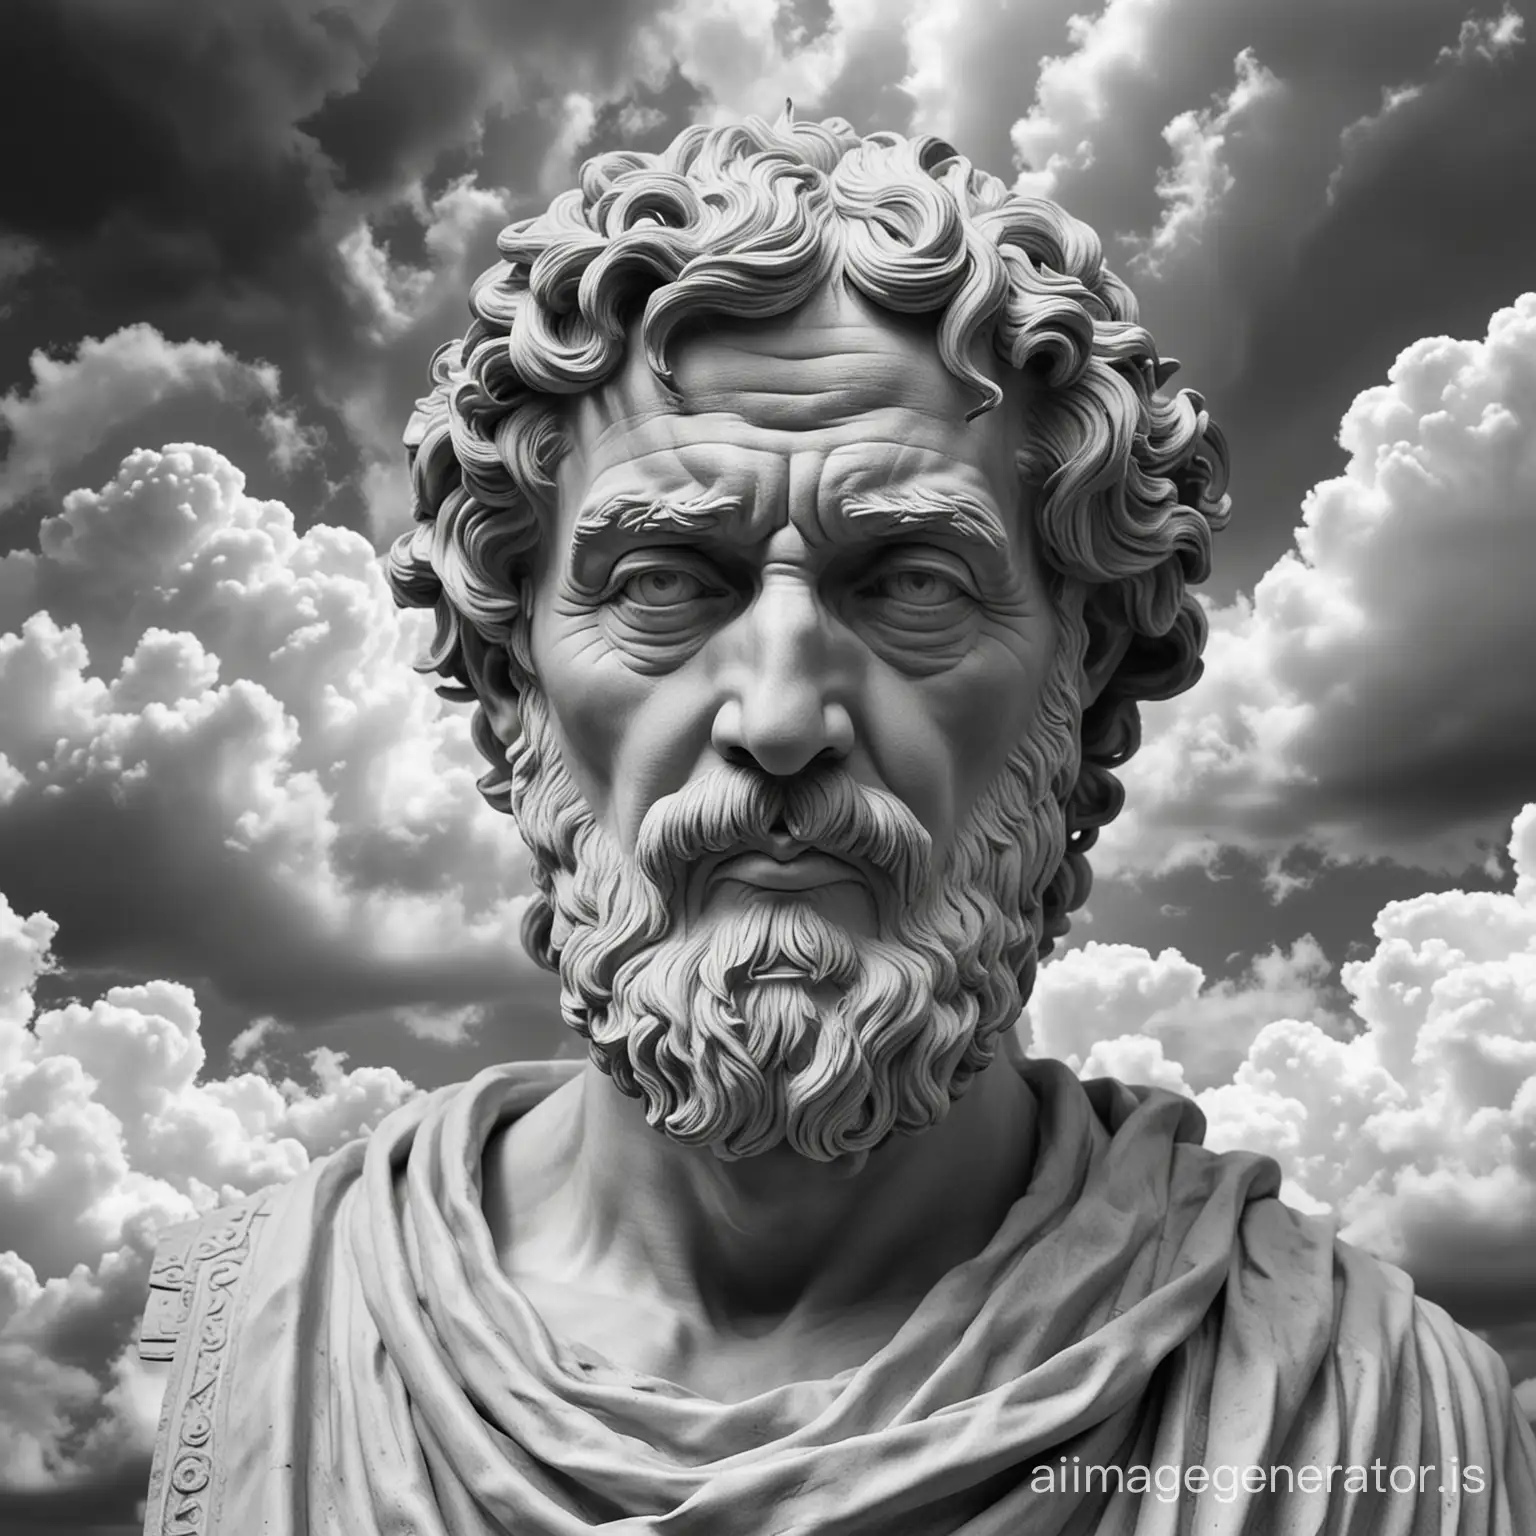 Create a grayscale sculpture of a stoic philosopher exuding wisdom and serenity, positioned in the center of the image. With clouds as The background an a close up view